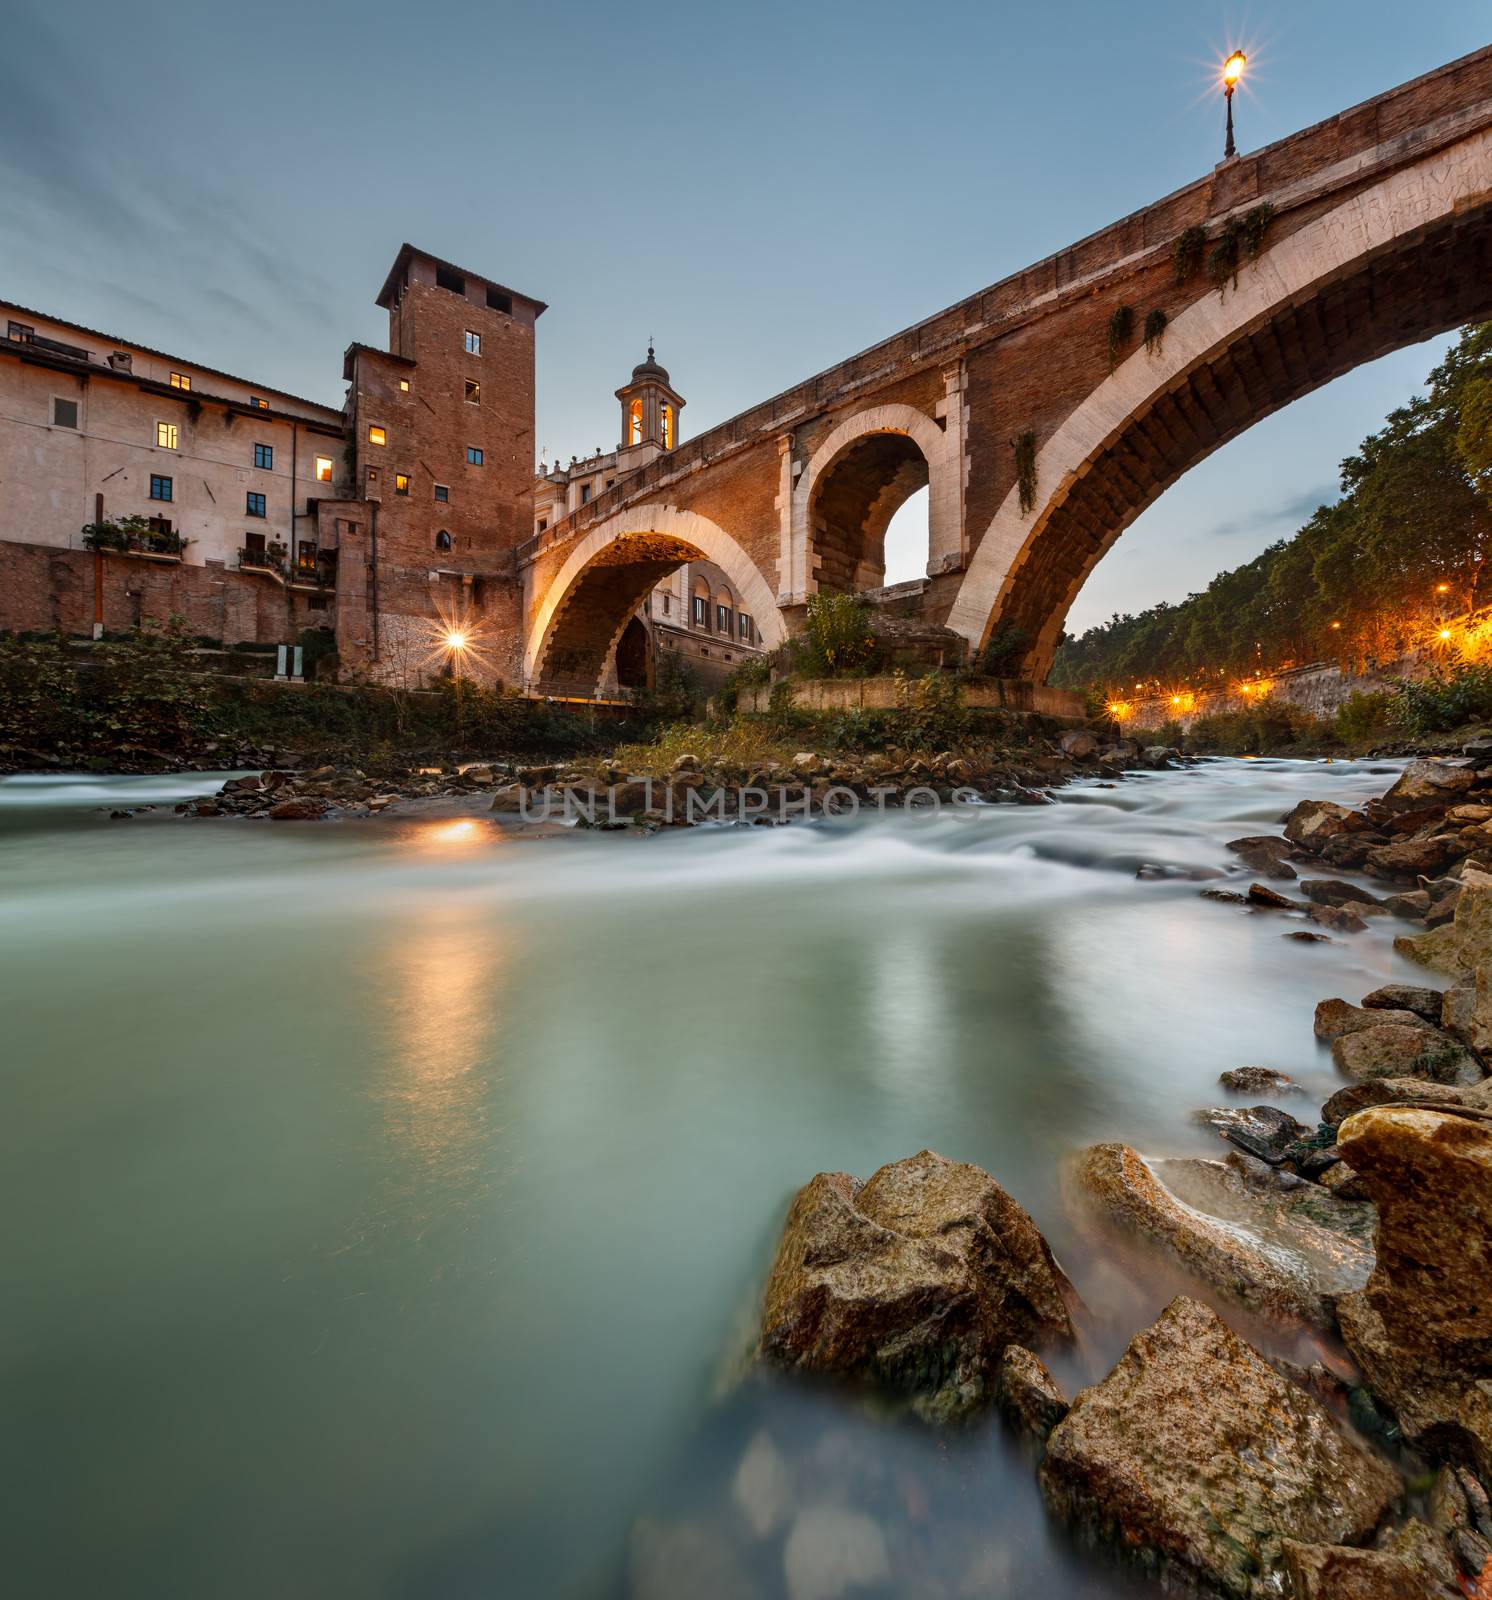 Fabricius Bridge and Tiber Island at Twilight, Rome, Italy. 
This is the oldest Roman bridge in Rome, still existing in its original state from 62 BC, built by Lucius Fabricius.